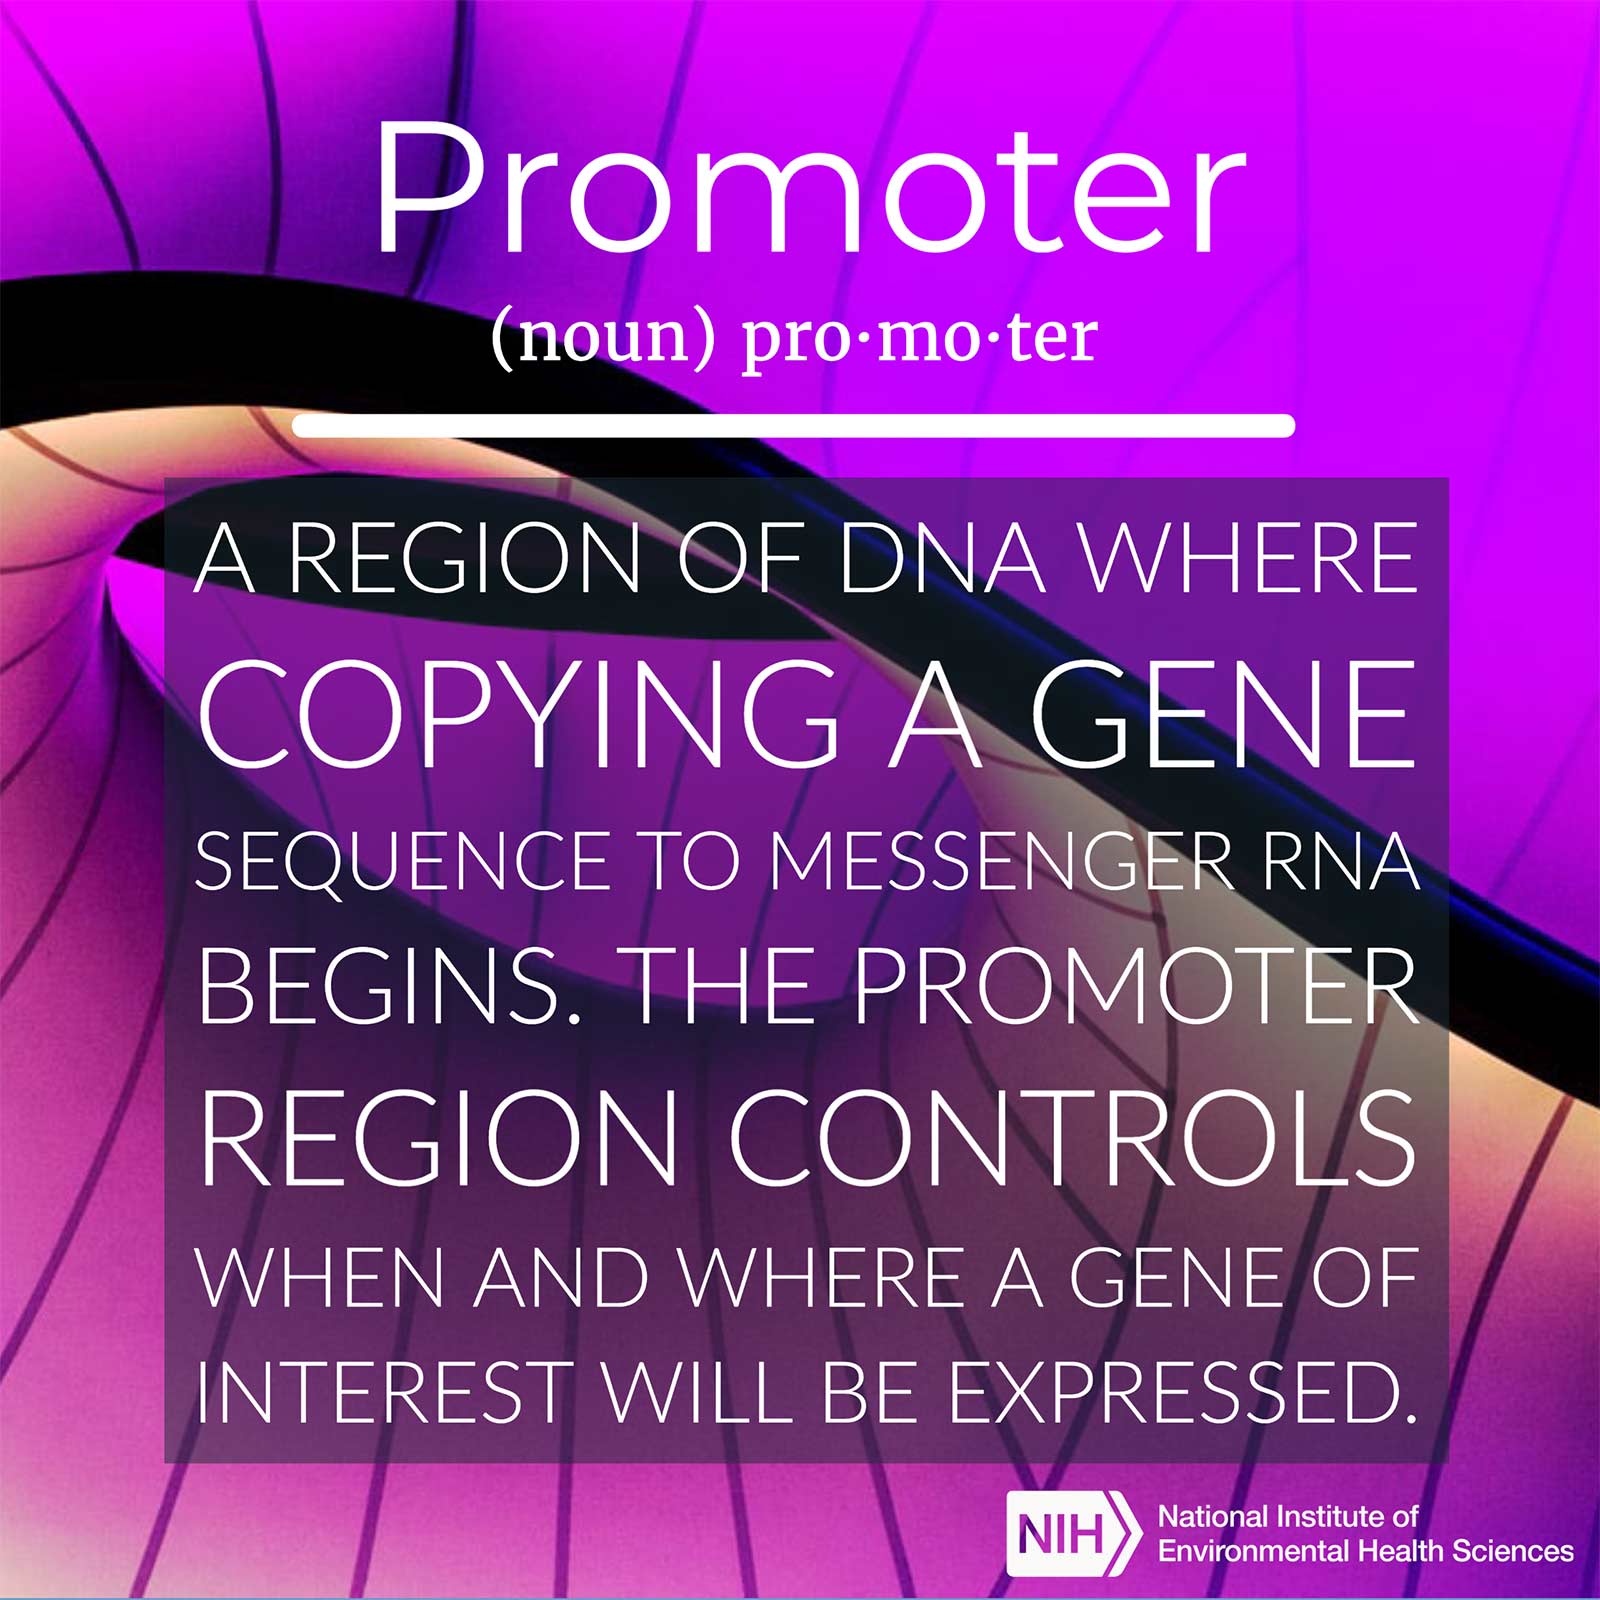 Promoter (noun) defined as &#39;a region of DNA where copying a gene sequence to messenger RNA begins. The promoter region controls when and where a gene of interest will be expressed.&#39;